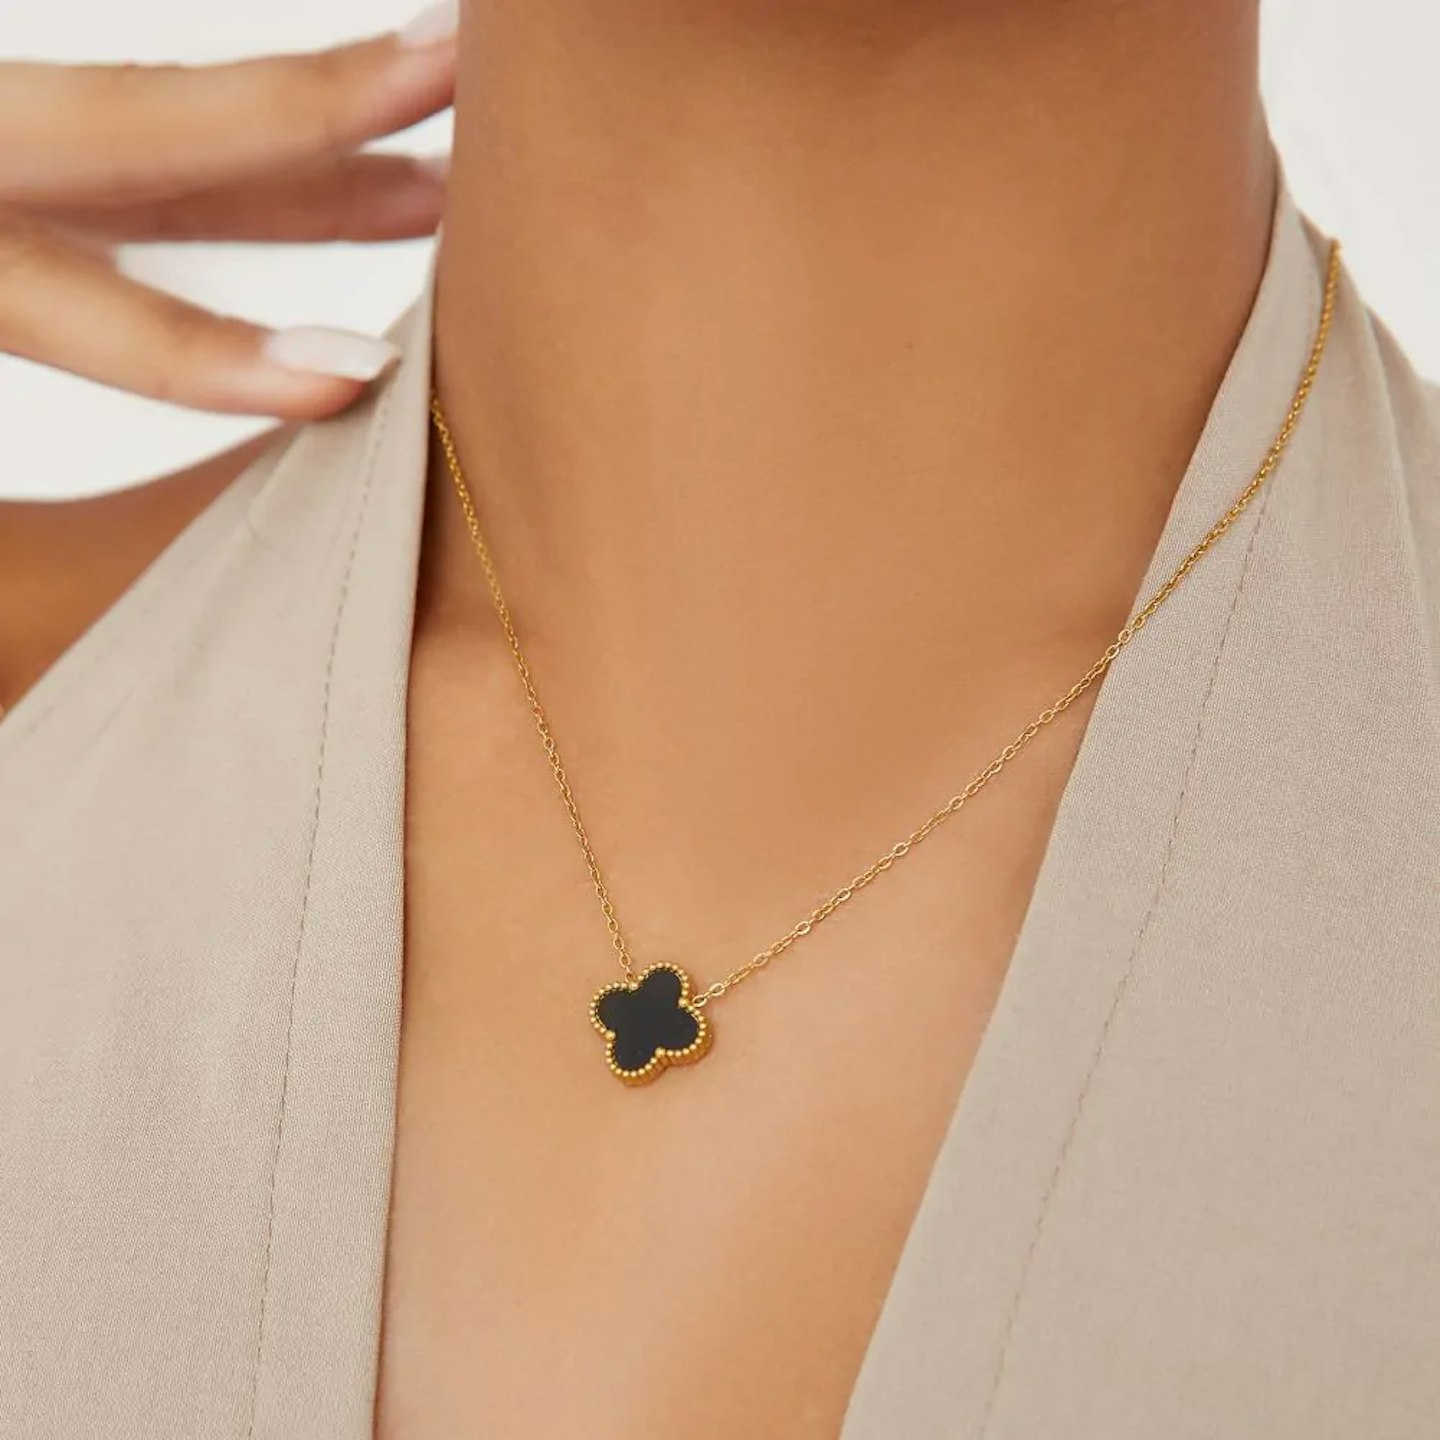 Ego Flower Detail Necklace In Black And Gold 